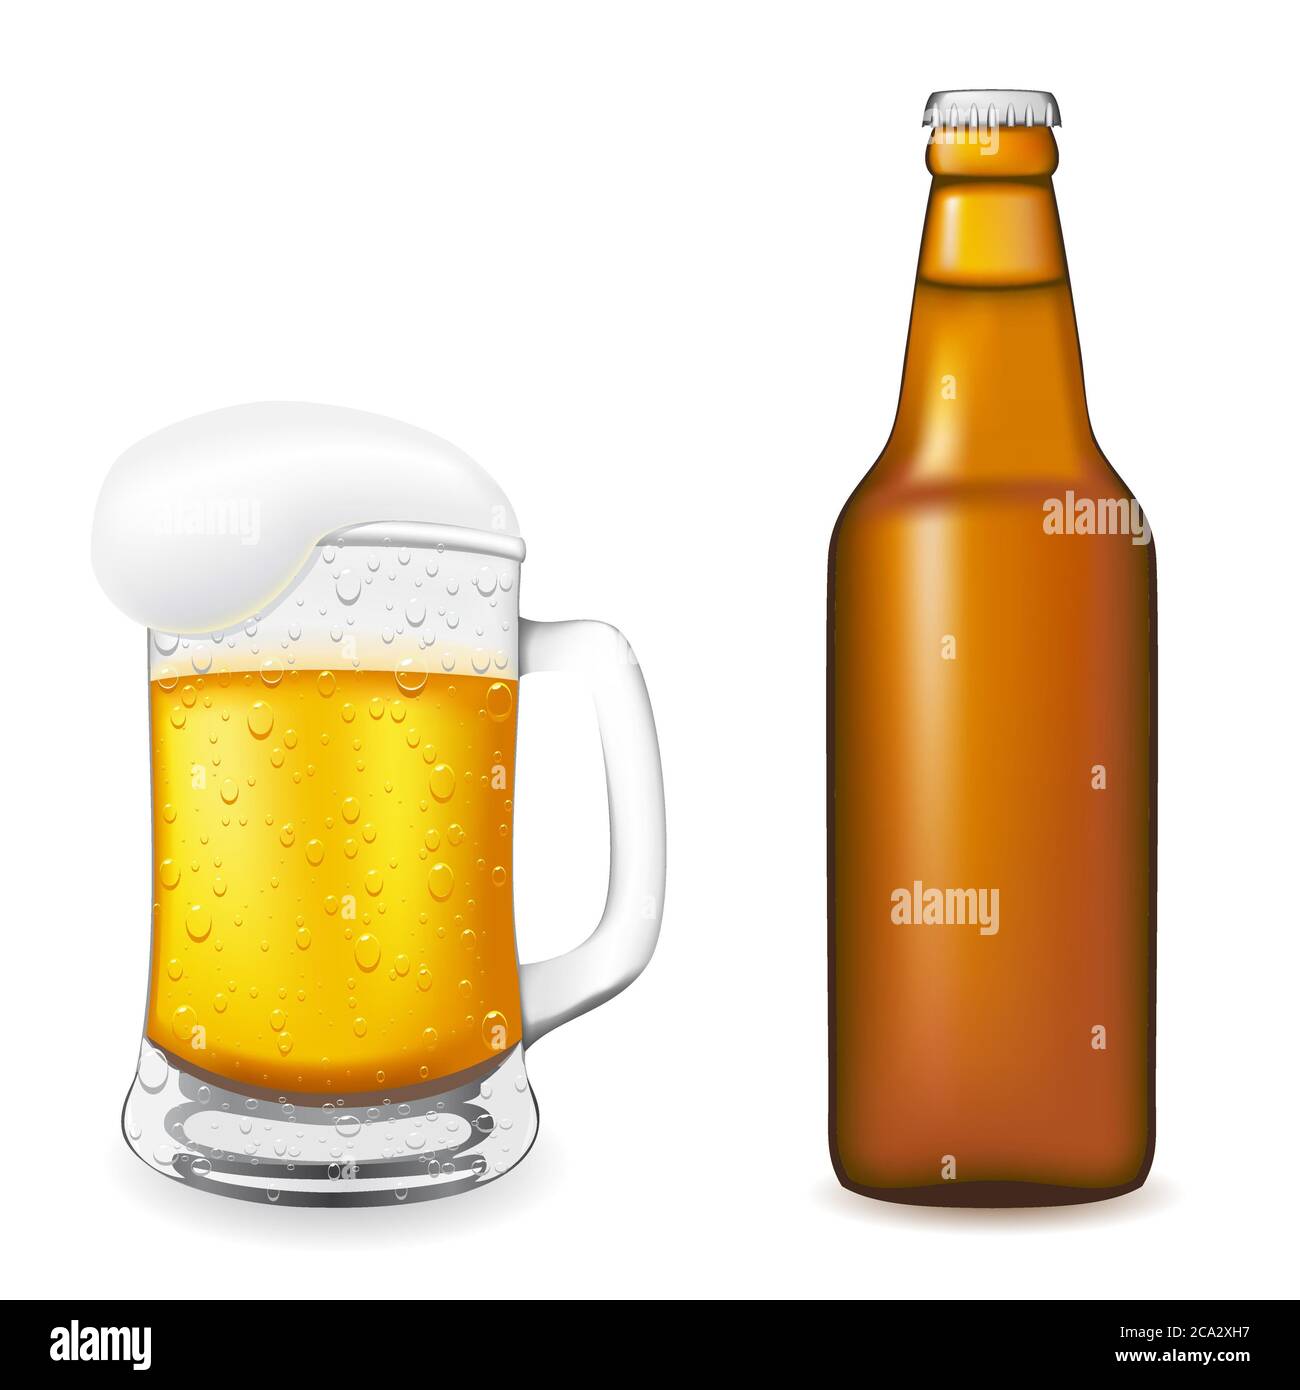 https://c8.alamy.com/comp/2CA2XH7/beer-in-glass-and-bottle-vector-illustration-isolated-on-white-background-2CA2XH7.jpg